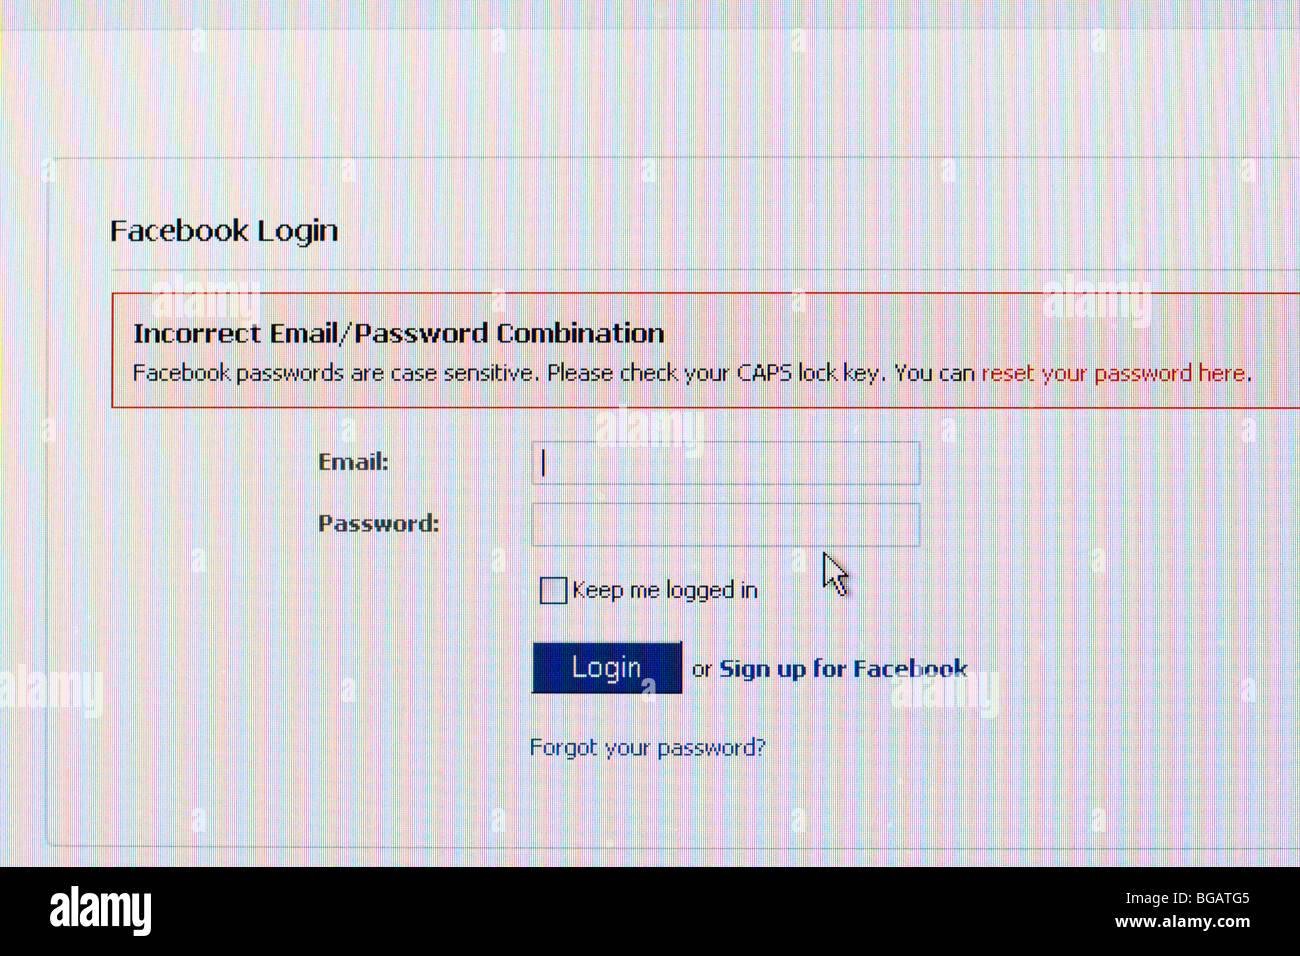 screenshot of incorrect email login screen for facebook social networking website for editorial use only Stock Photo